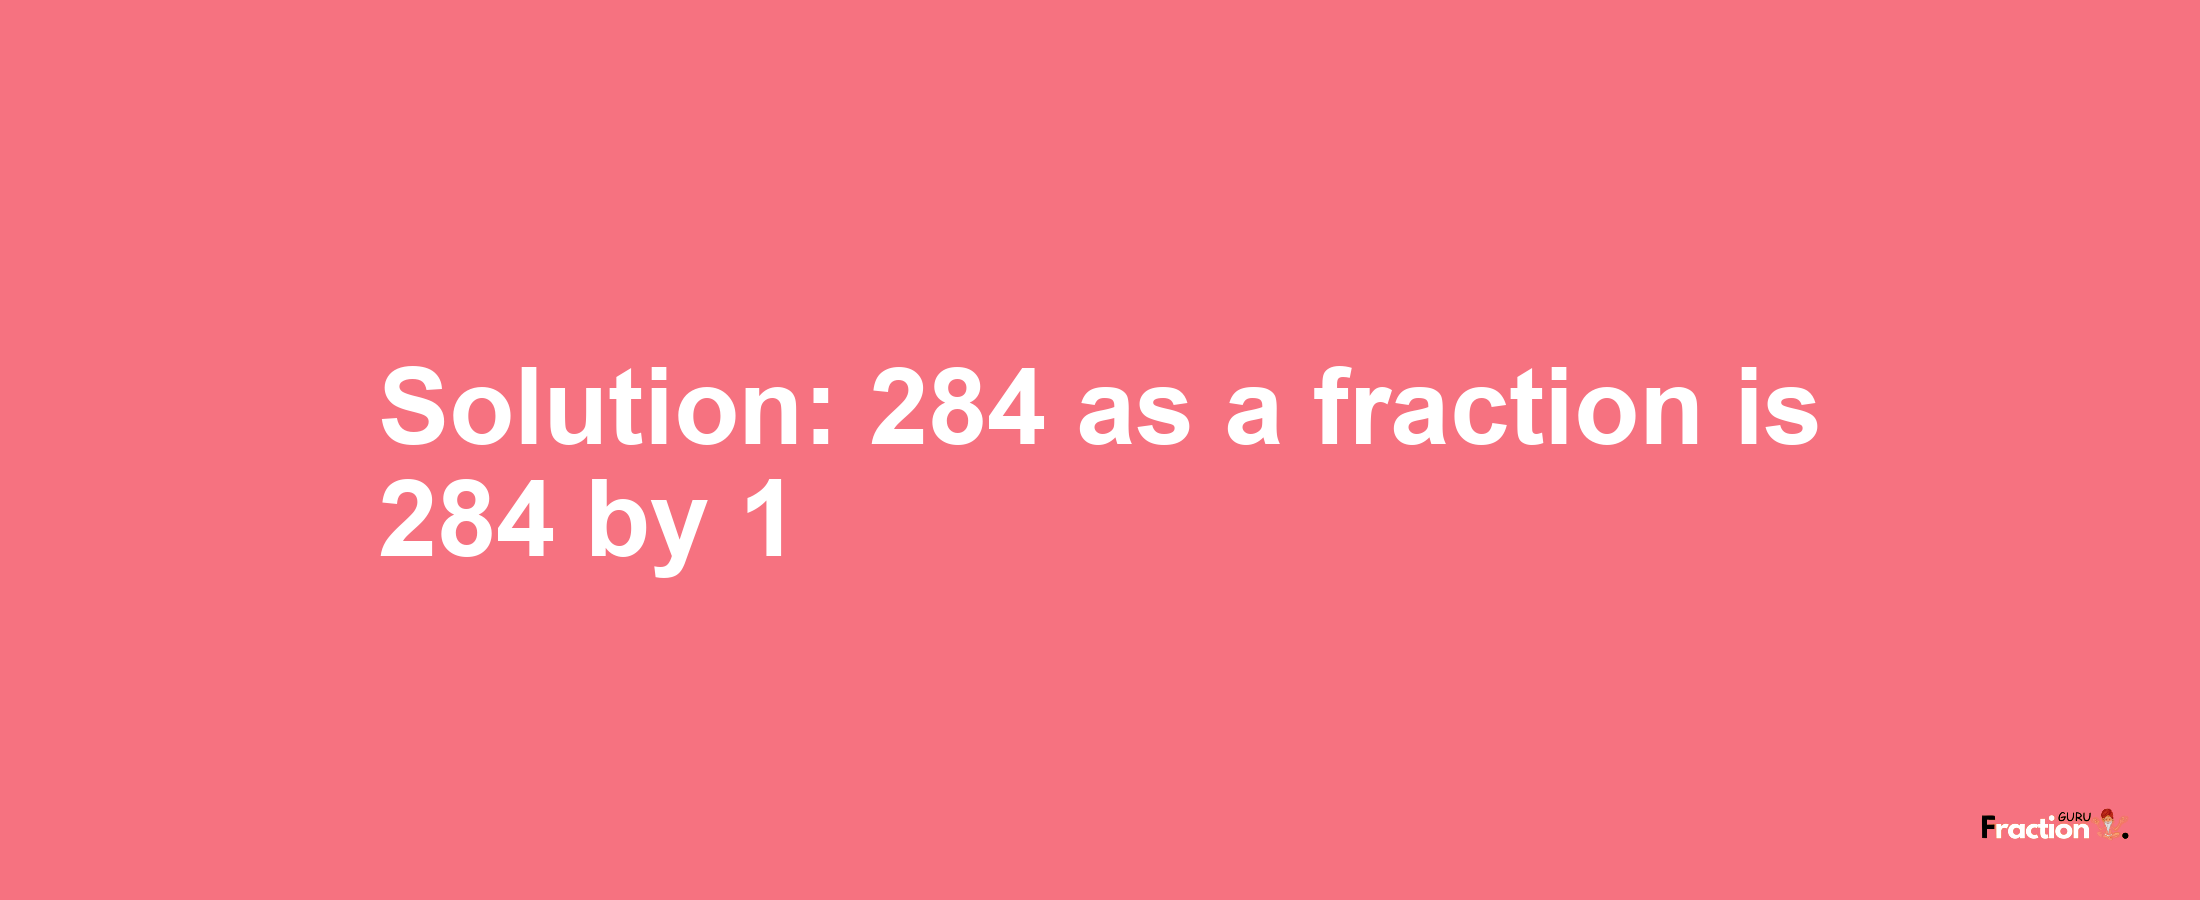 Solution:284 as a fraction is 284/1